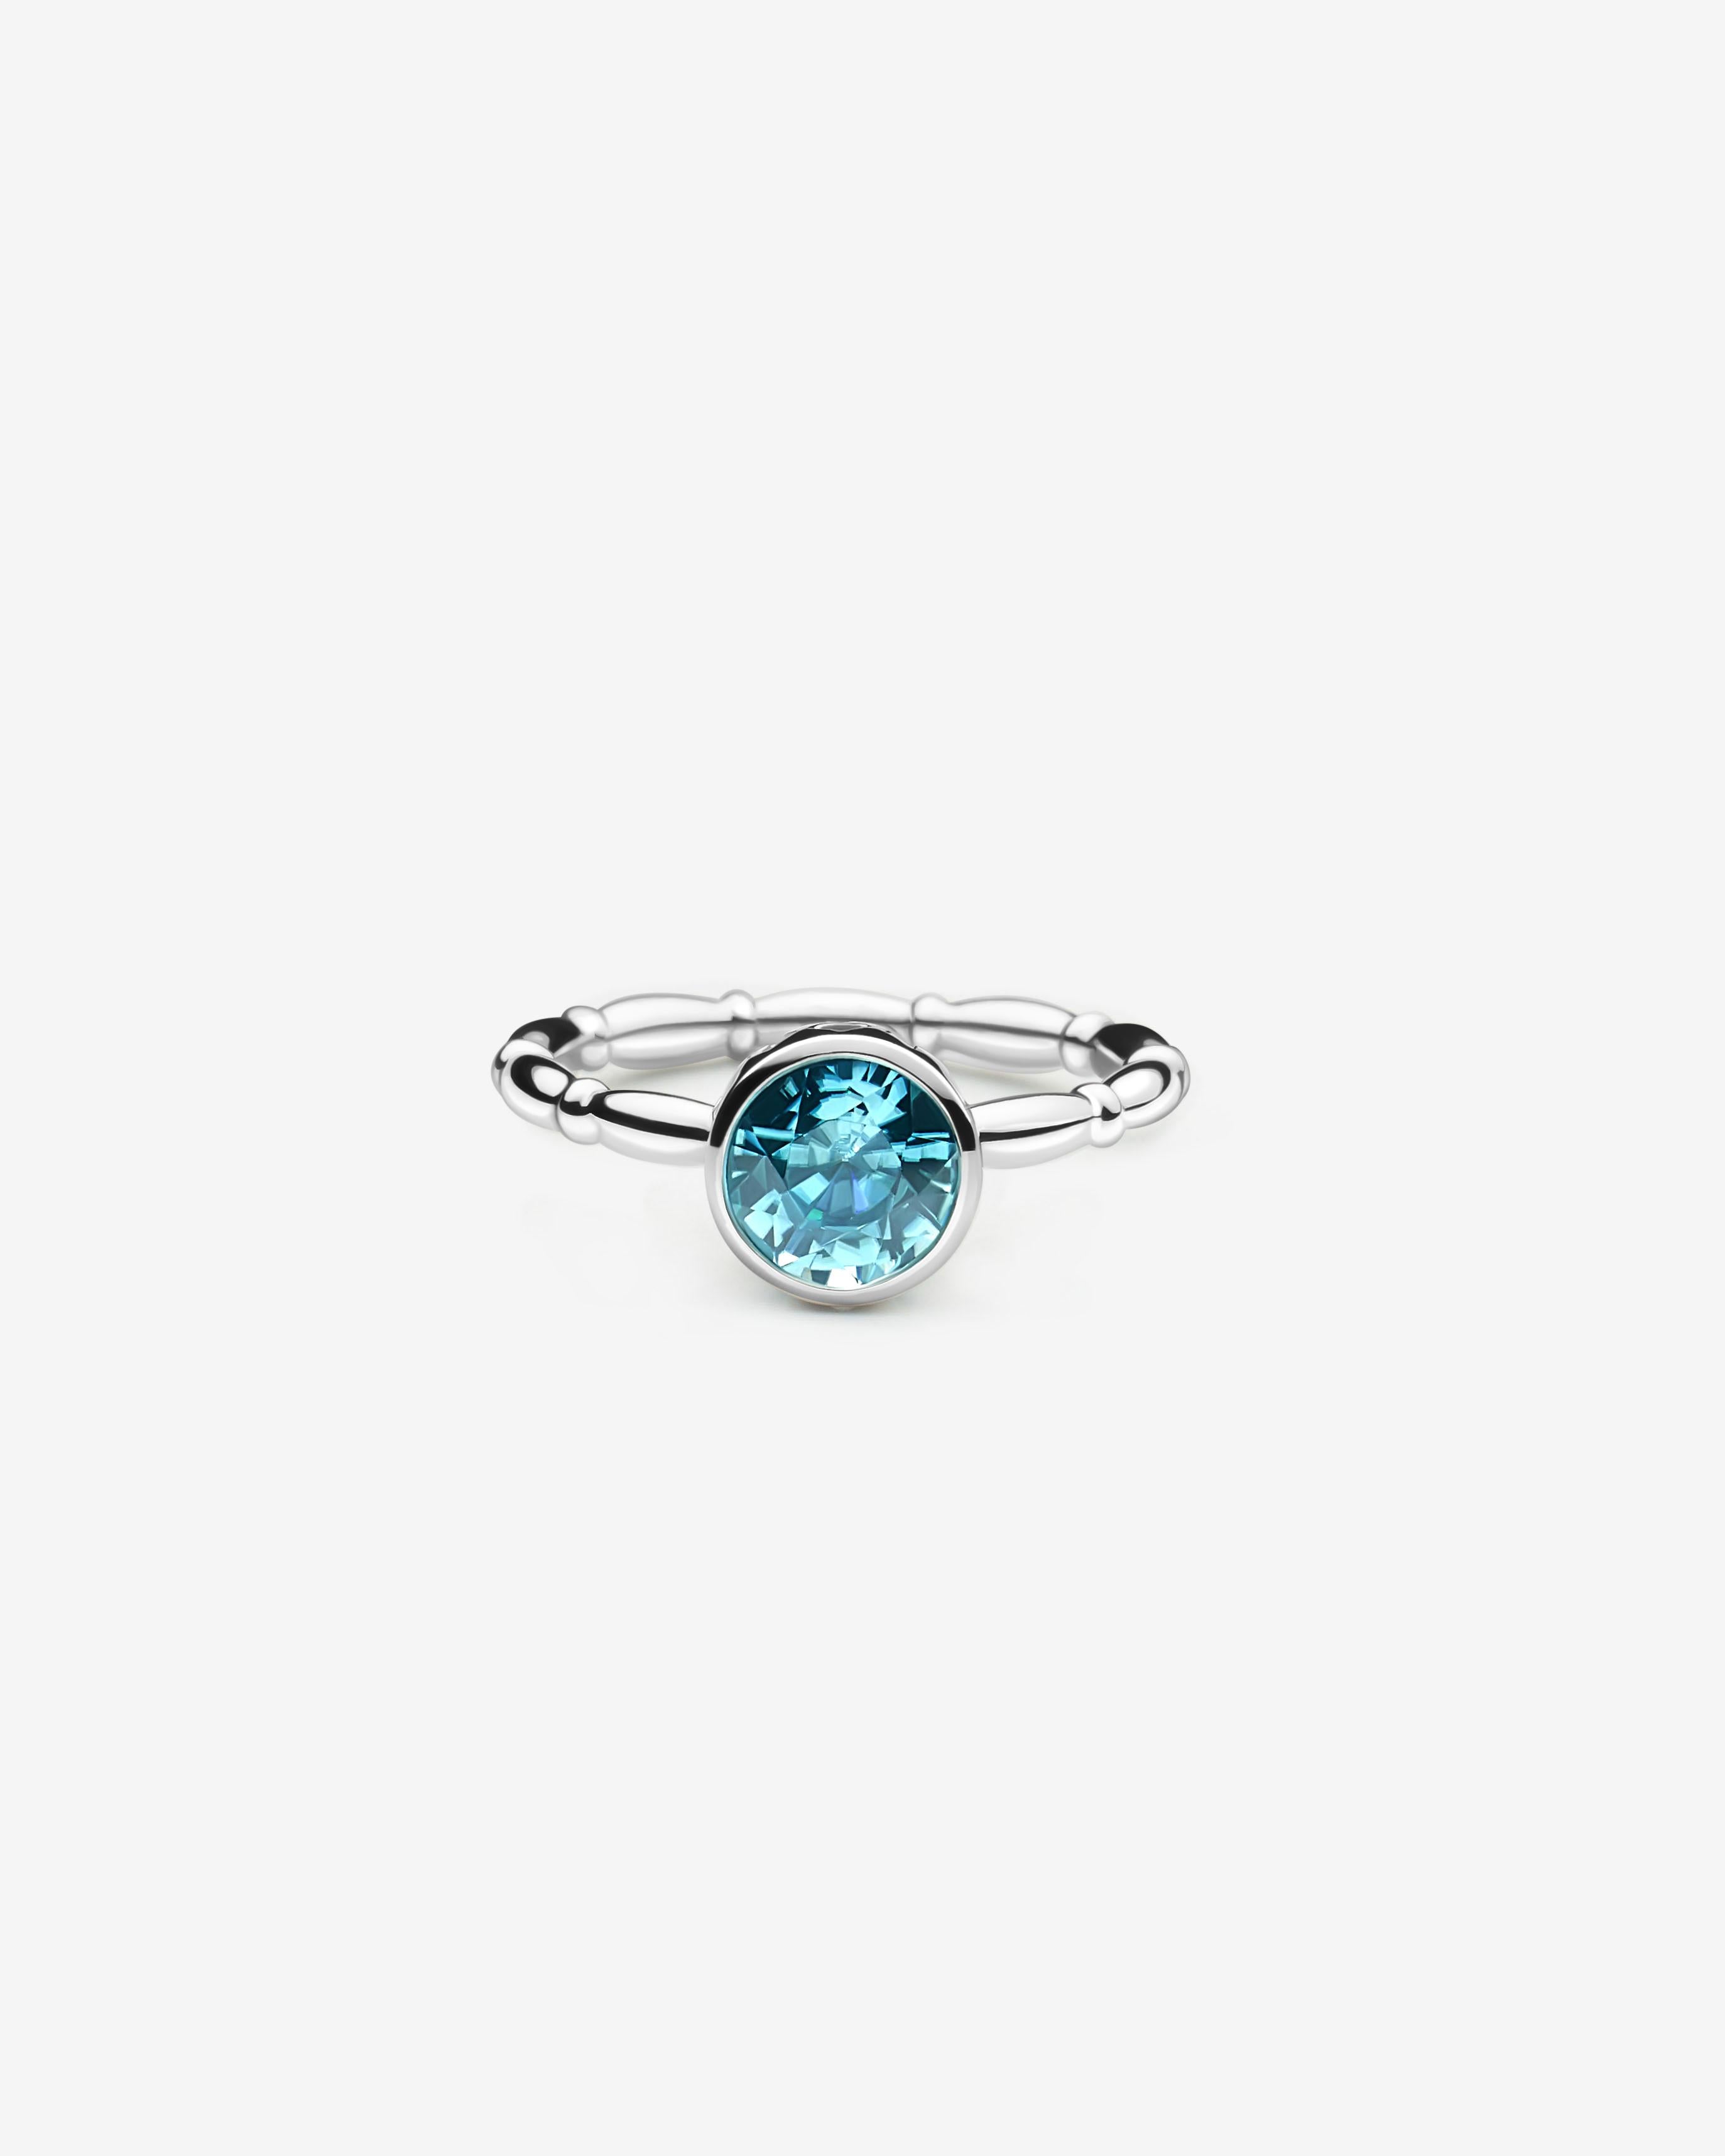 For Sale:  14k White Gold Solitaire Engagement Ring with 2.16 Carat Round Blue Zircon 2